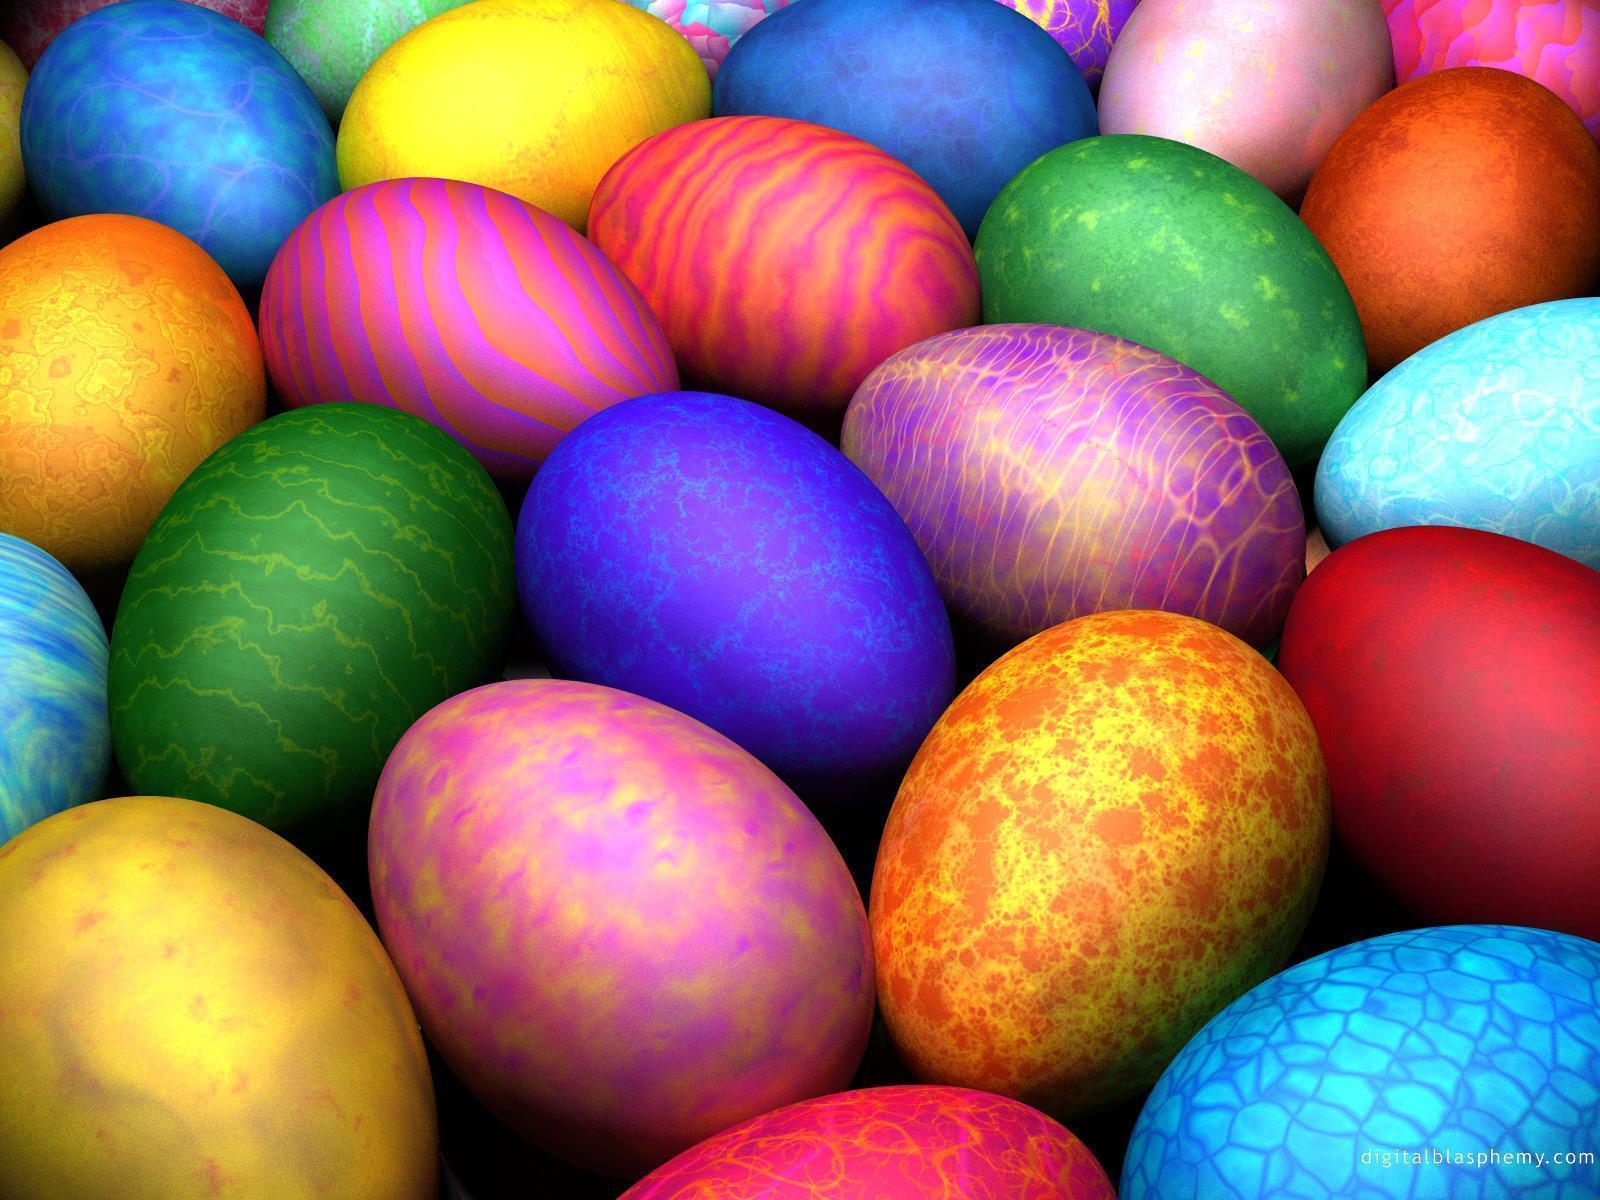 Colorful Easter Eggs Wallpaper Colorful Easter eggs free desktop background - free wallpaper image